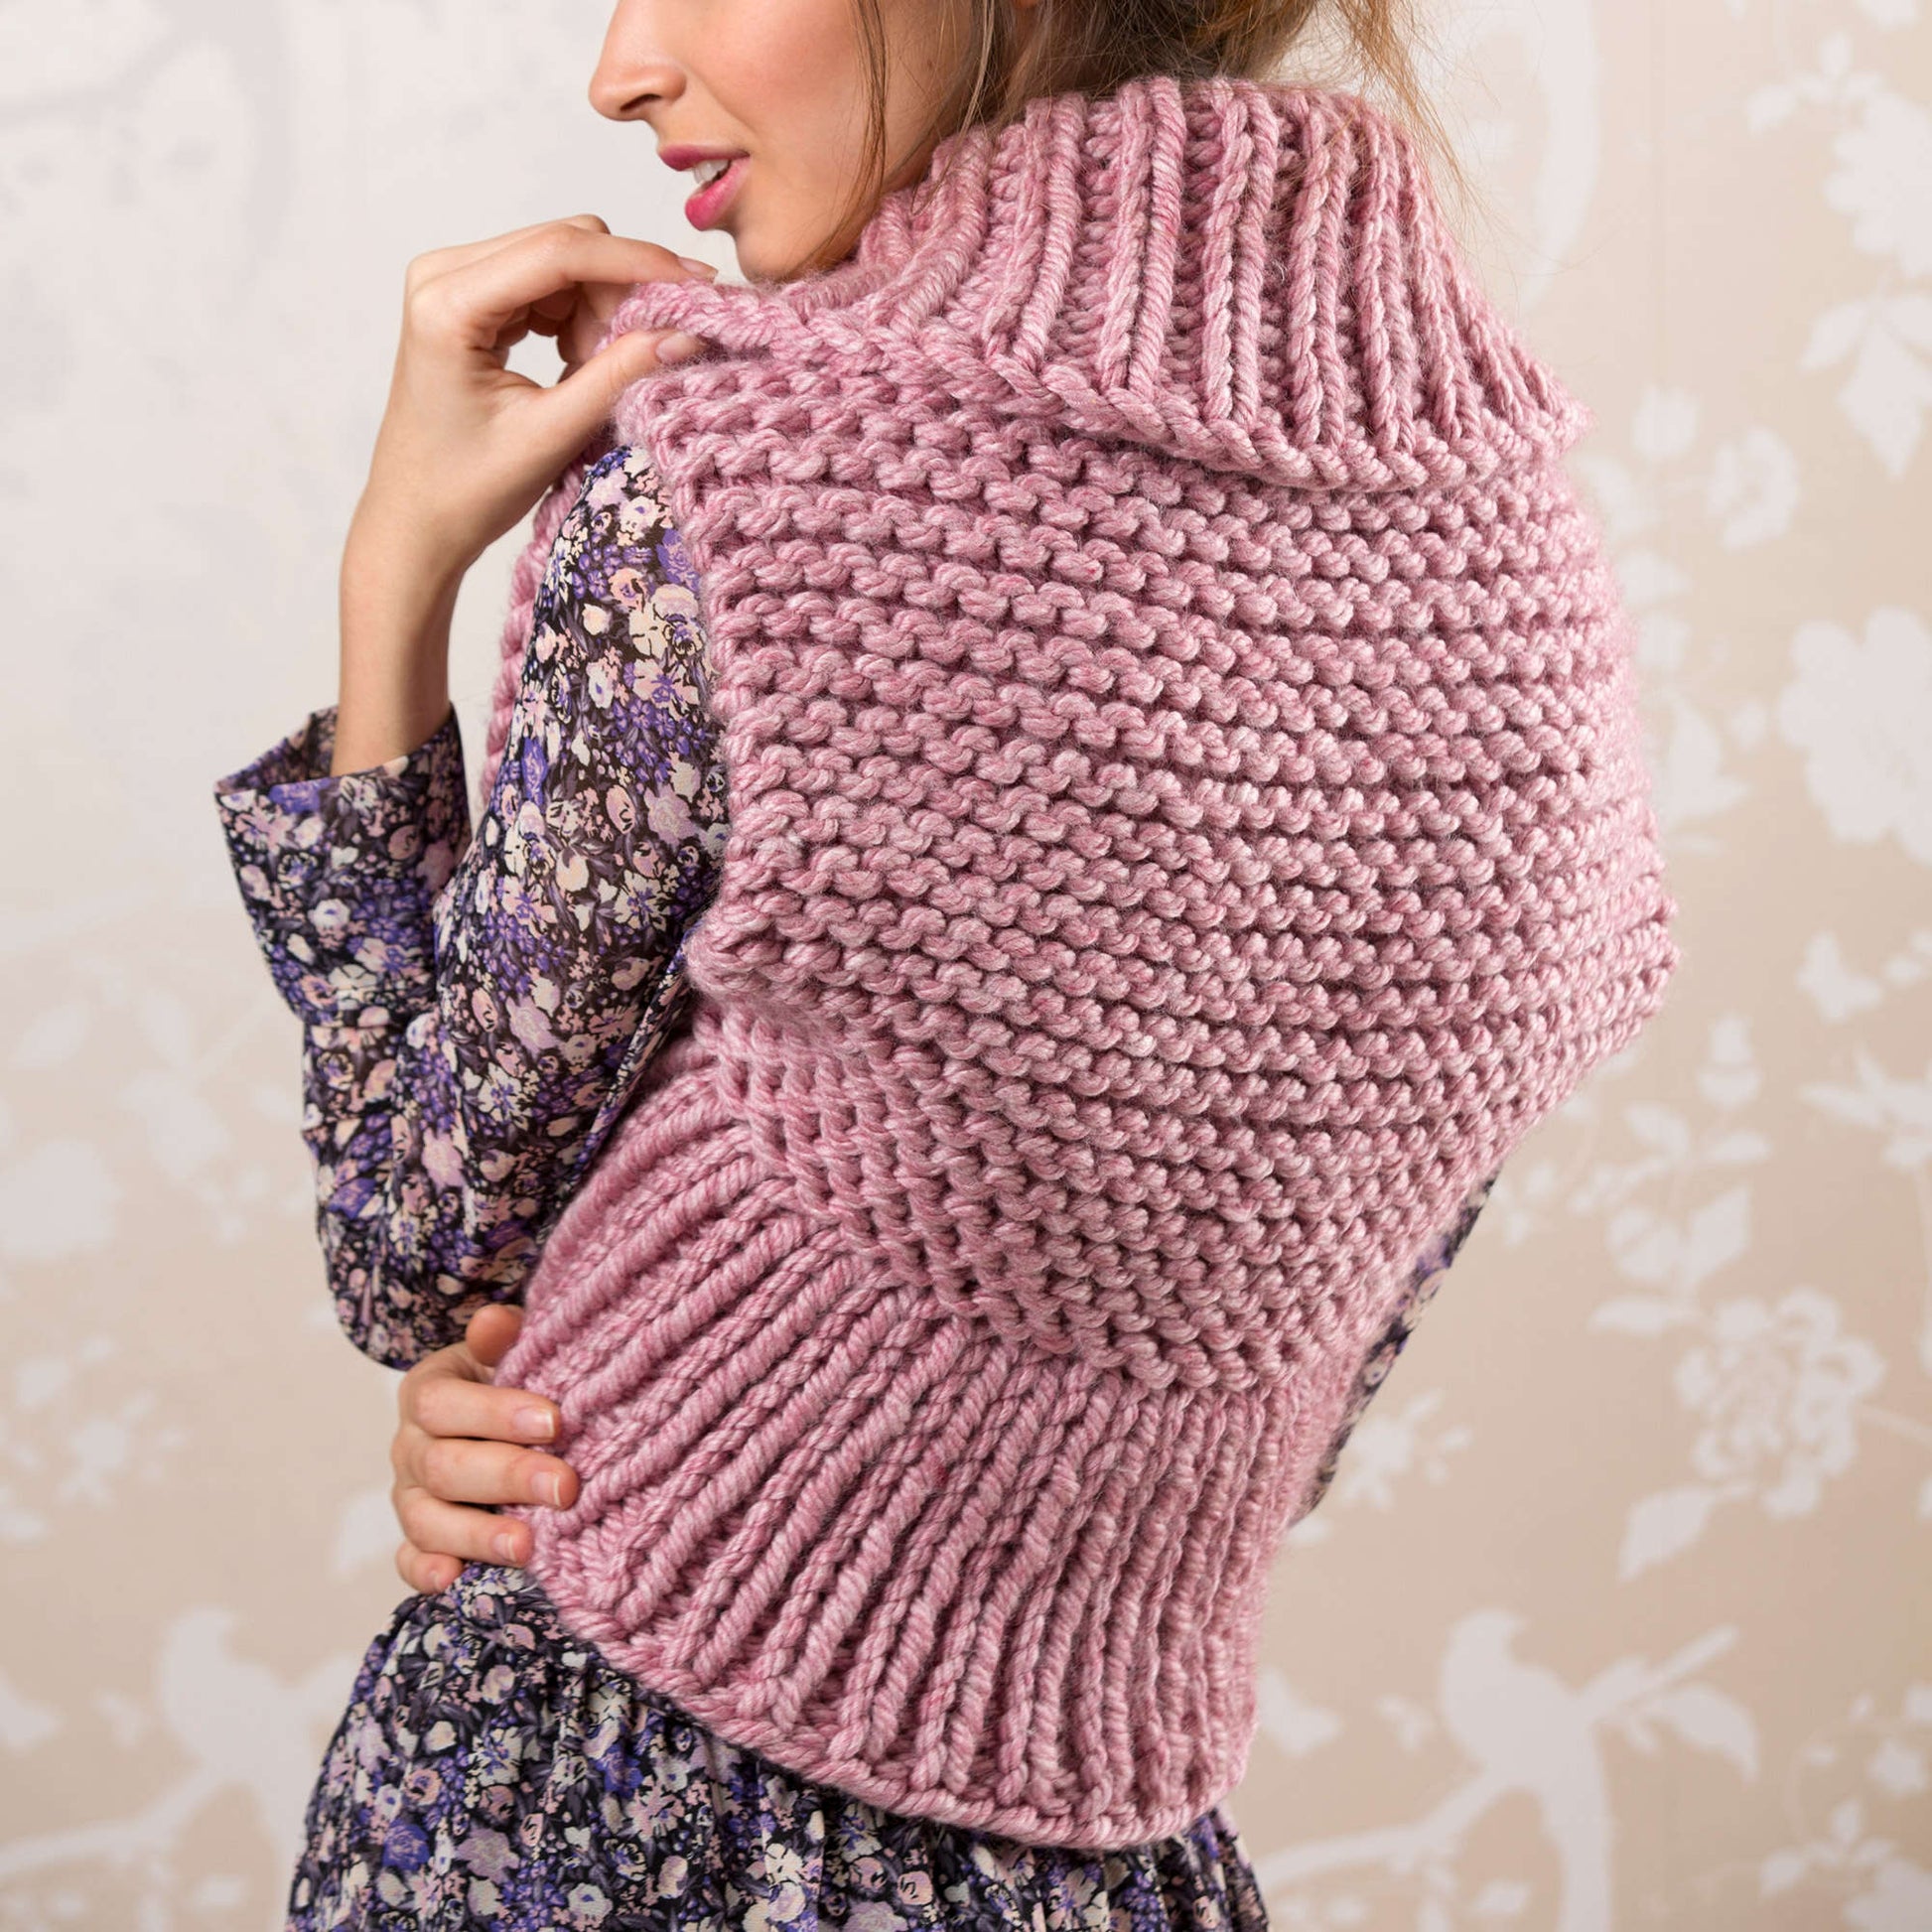 Free Red Heart Cozy Shrug Knit Pattern